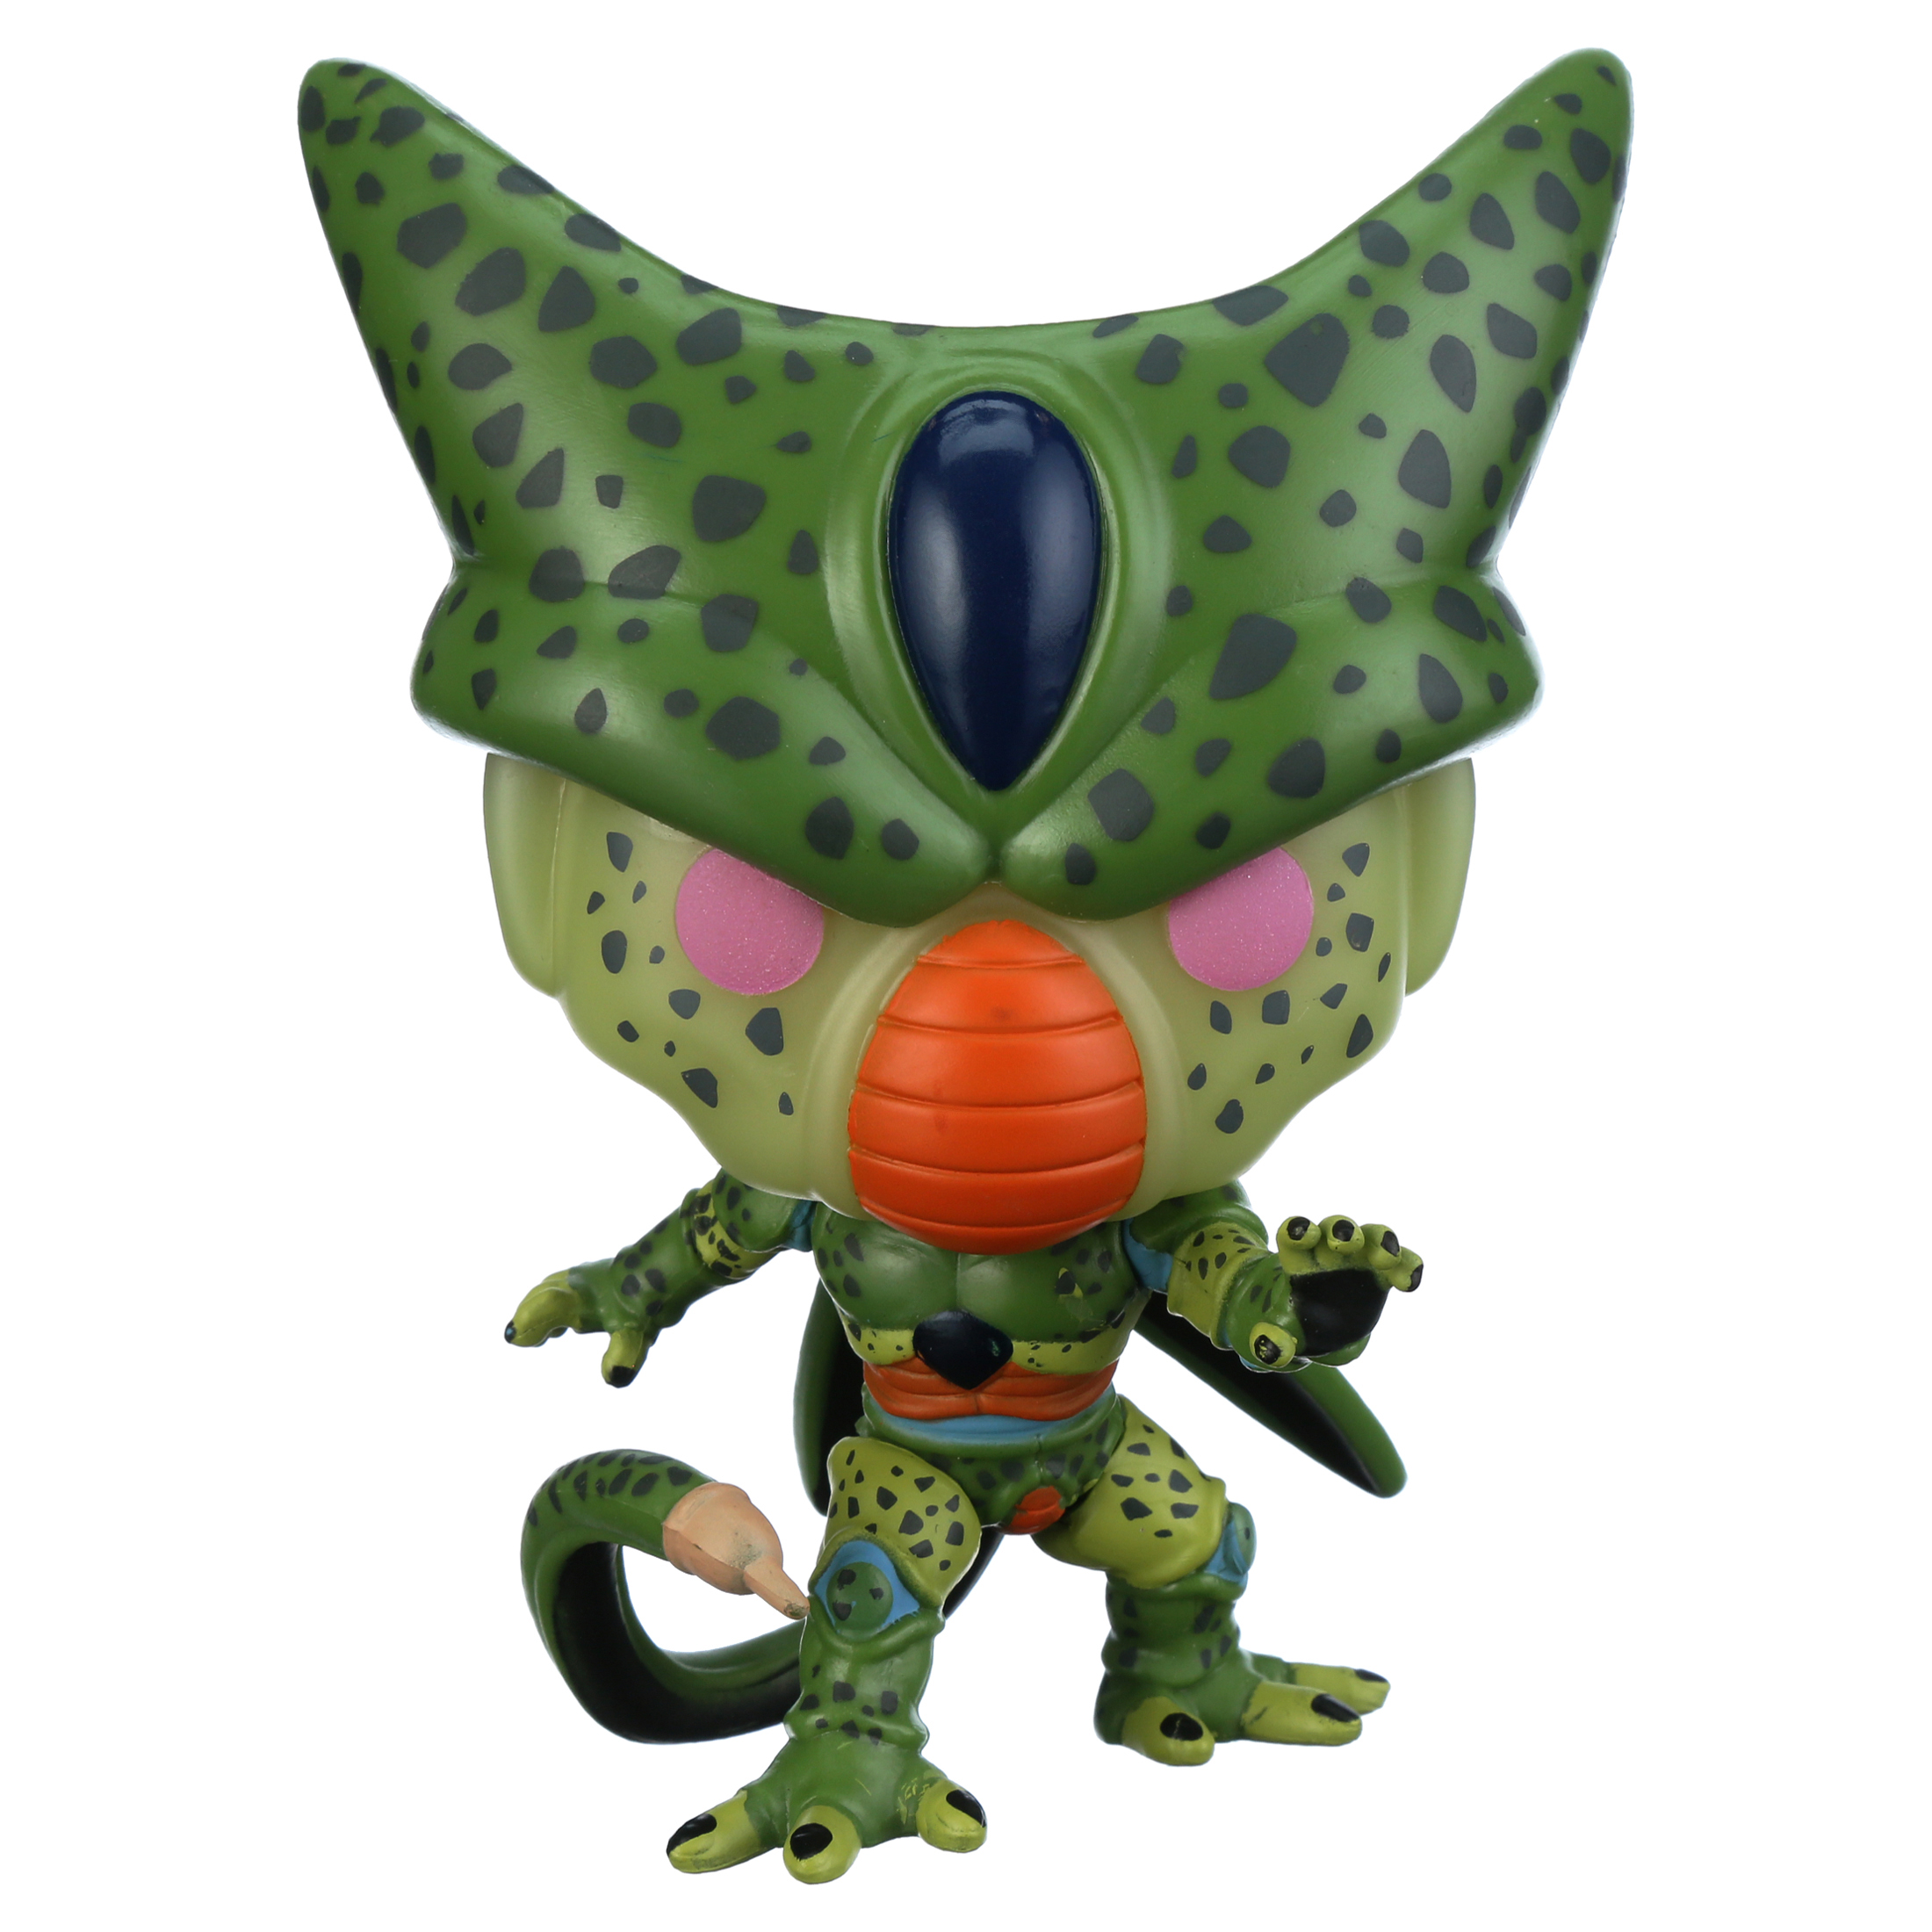 Funko POP! Animation: Dragon Ball Z - Cell (First Form) (Glow) - Walmart Exclusive - image 1 of 6